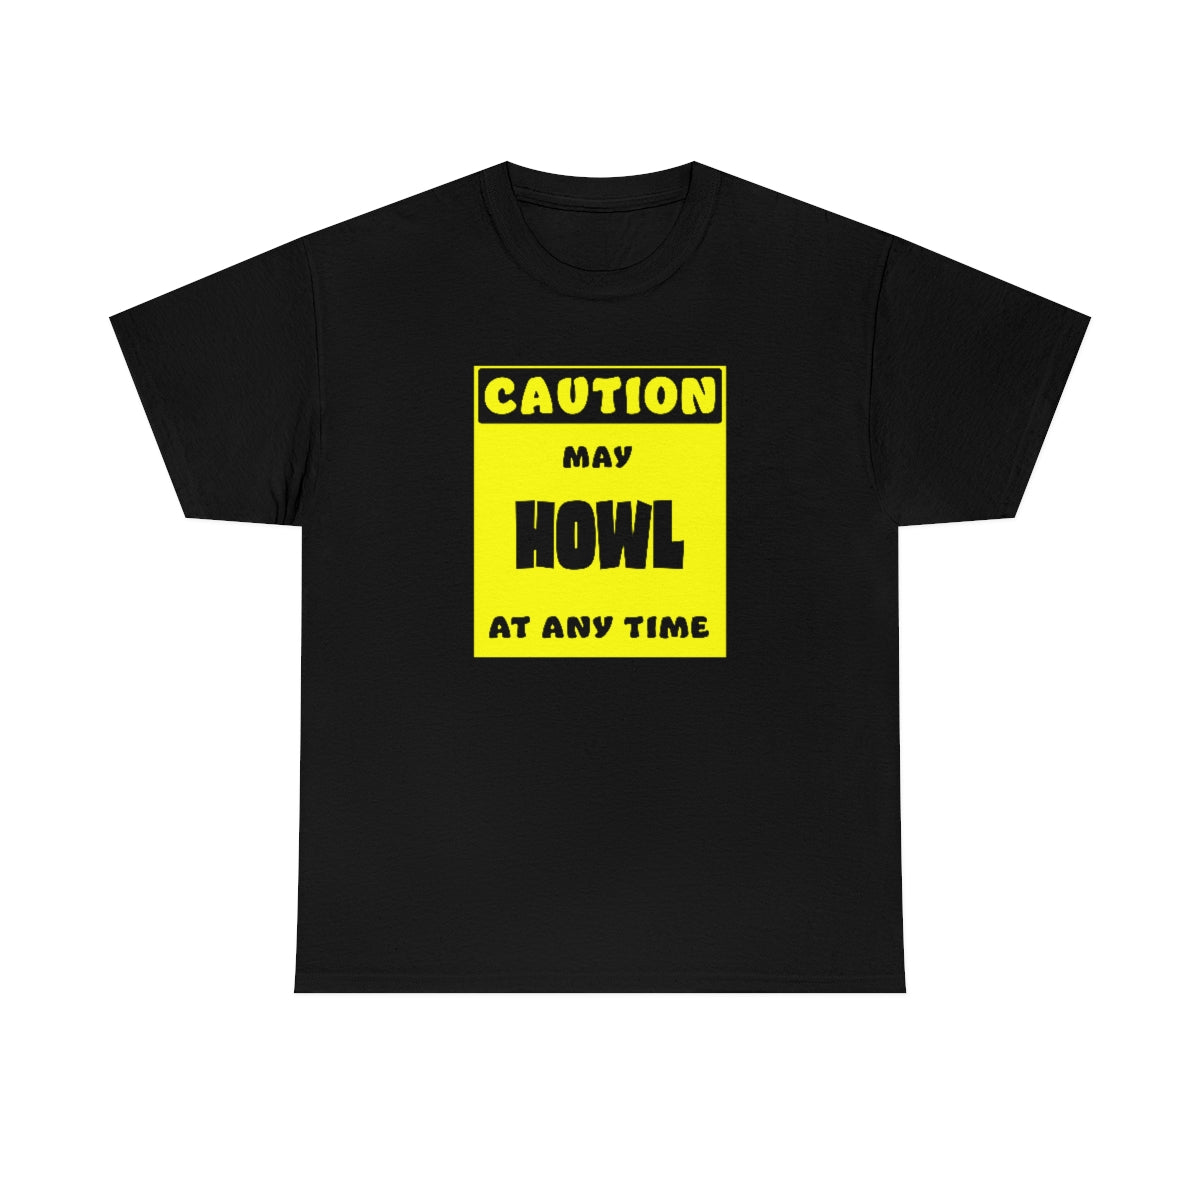 CAUTION! May HOWL at any time! - T-Shirt T-Shirt AFLT-Whootorca Black S 